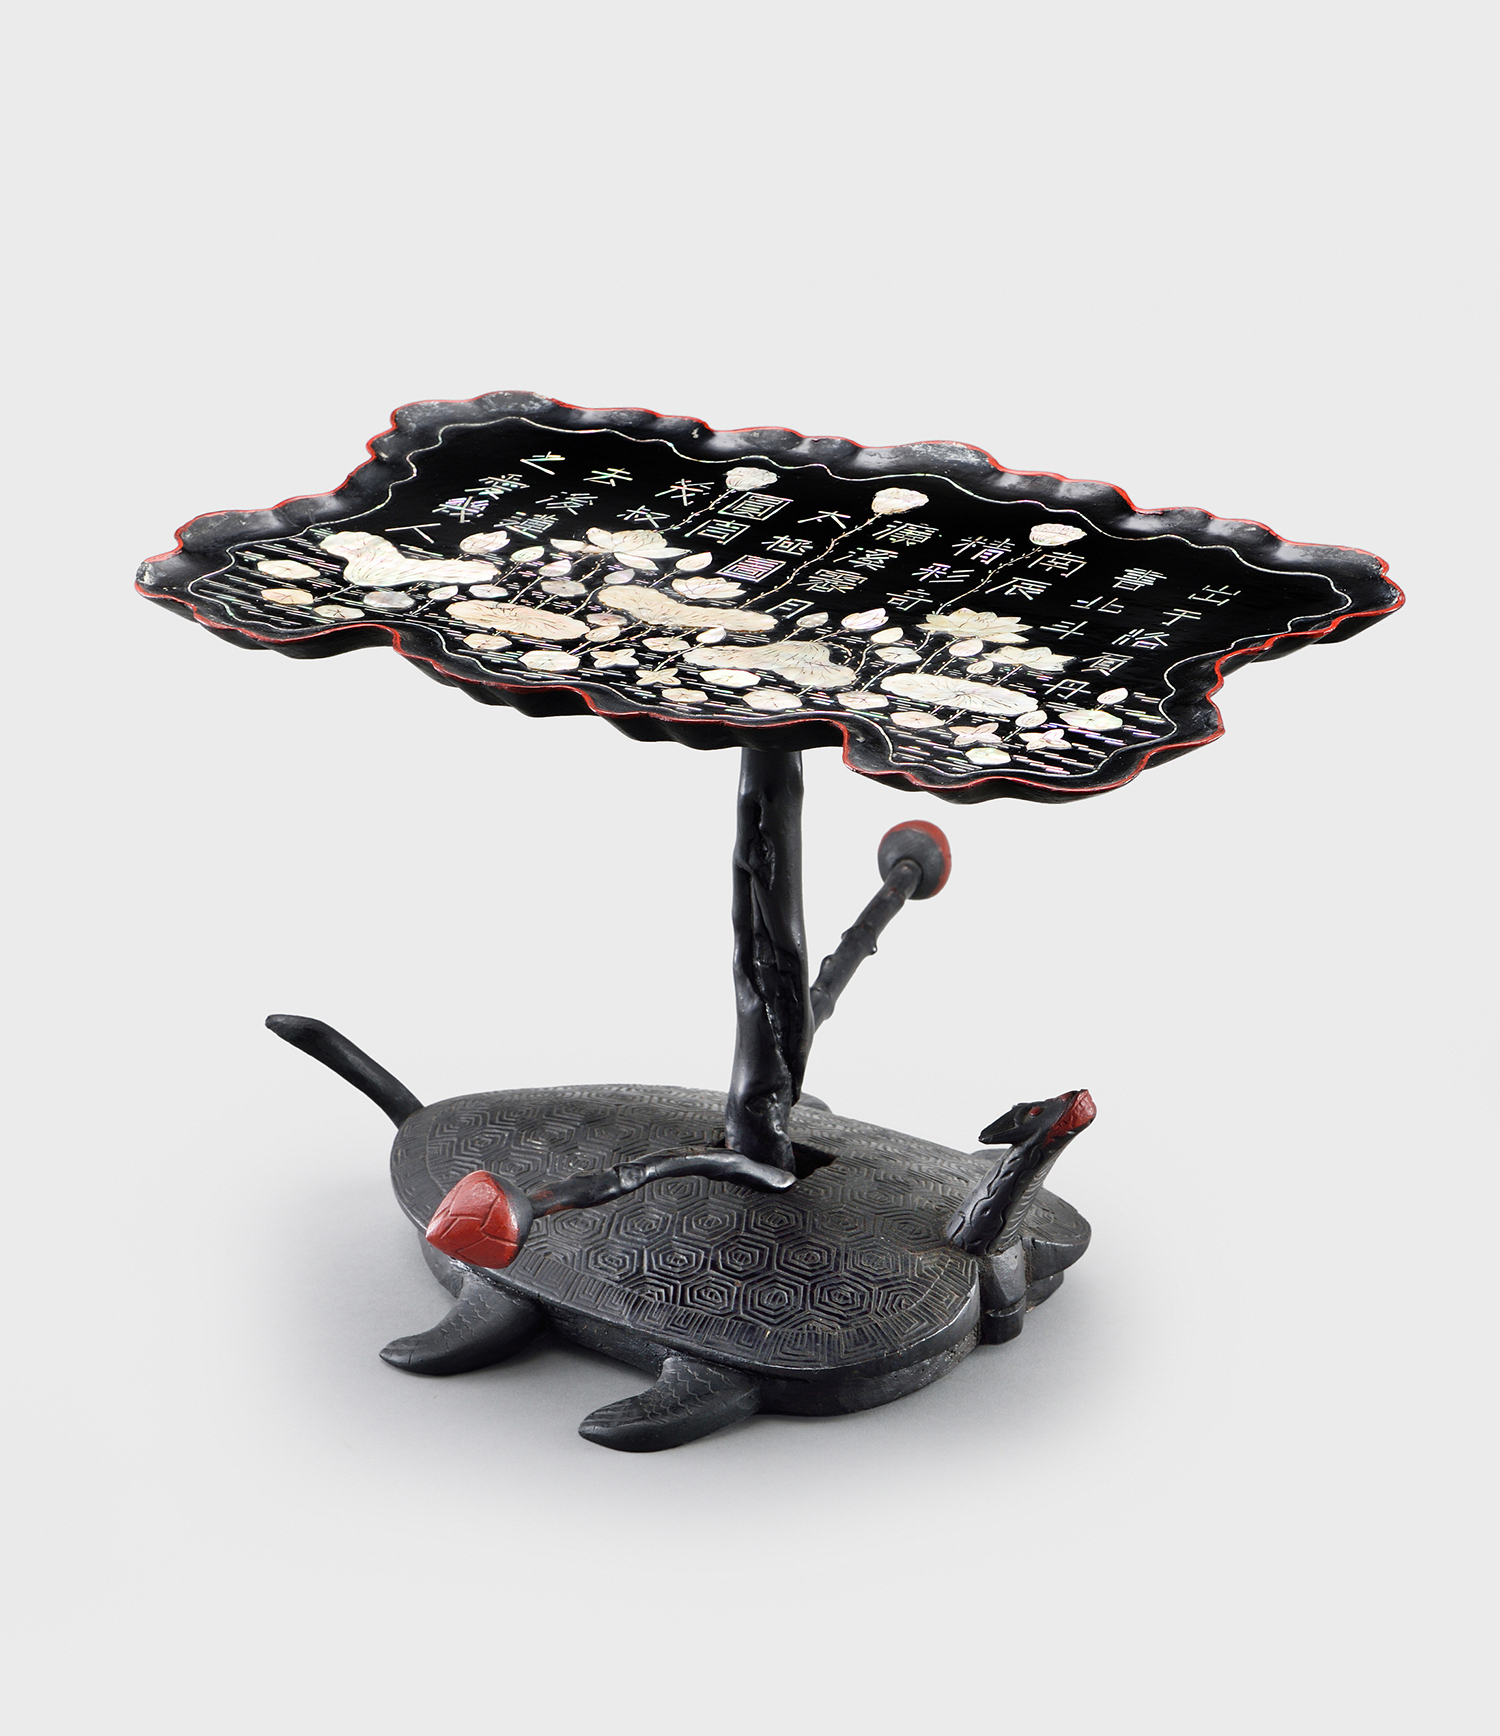 Lotus-shaped Table with a Turtle-shaped Pedestal and Lotus Pond Design in Mother-of-pearl Inlay